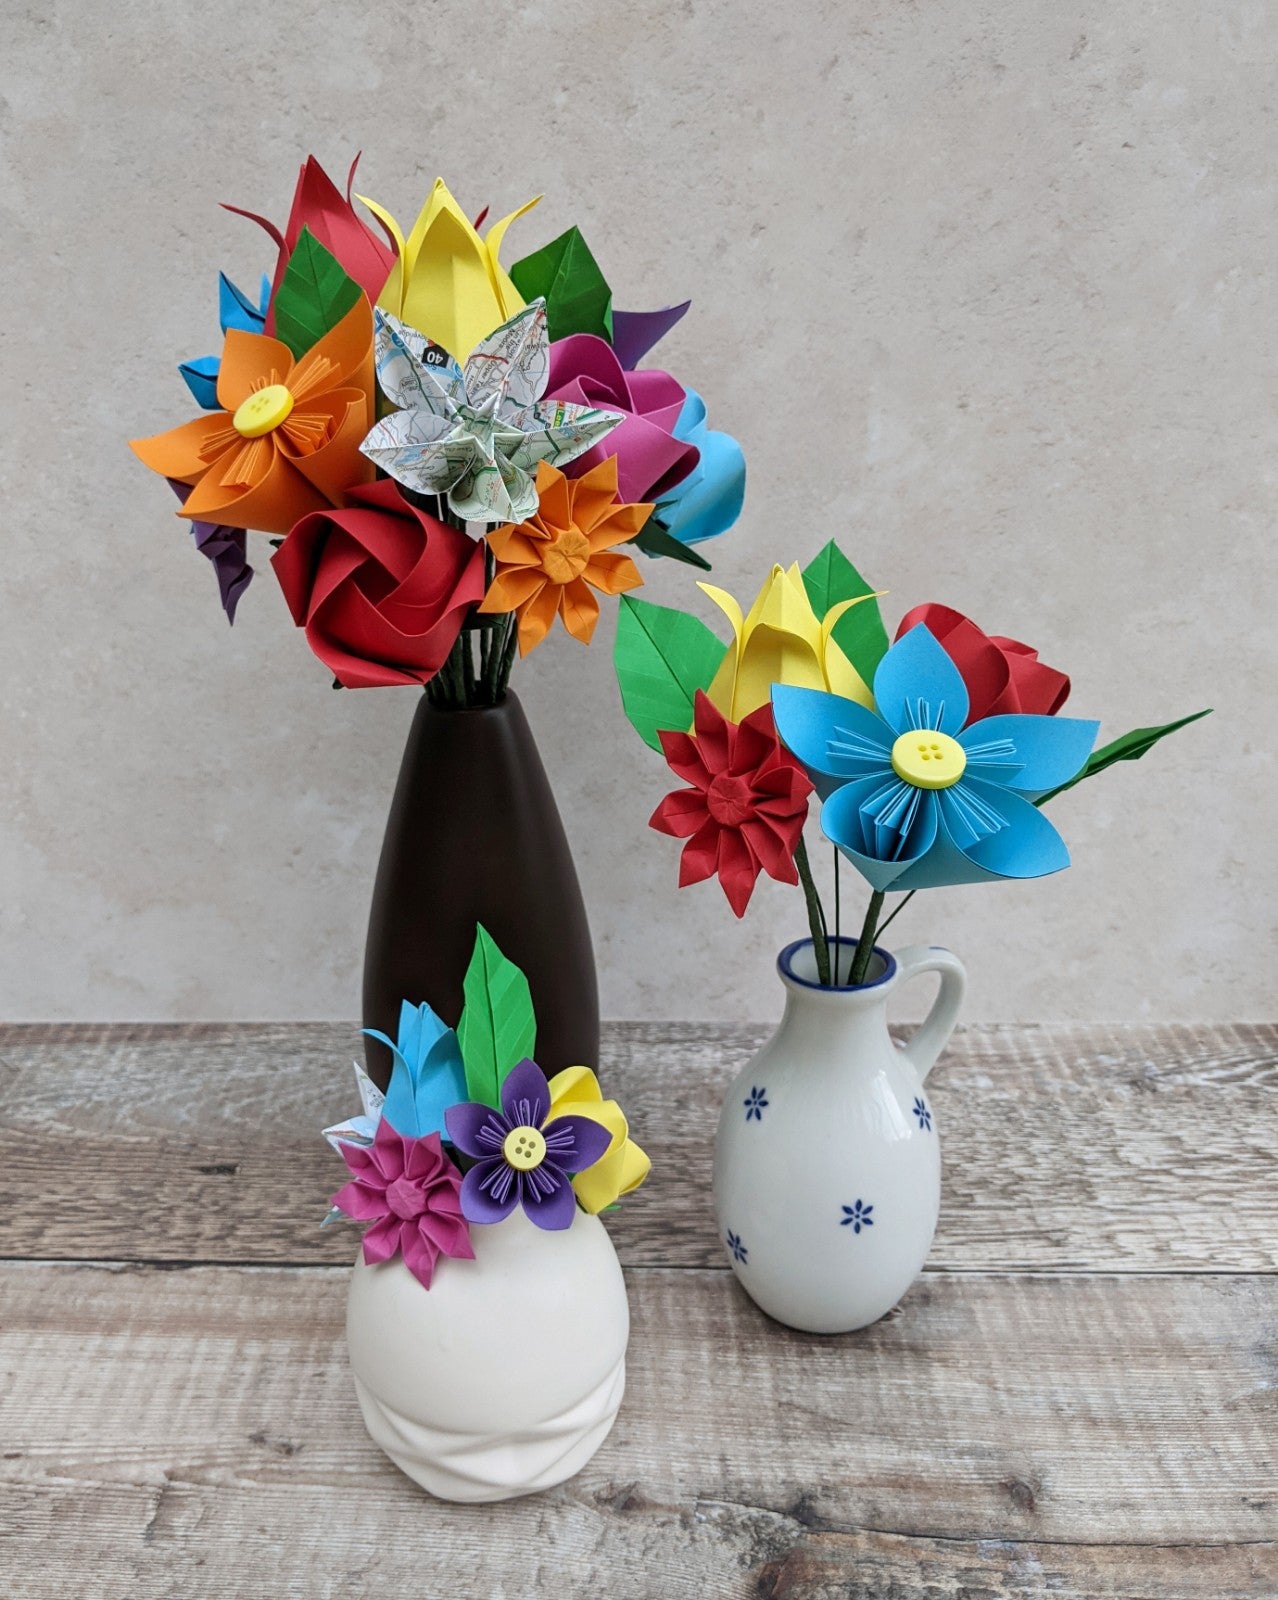 Colourful origami wedding bouquet with upcycled map paper flowers